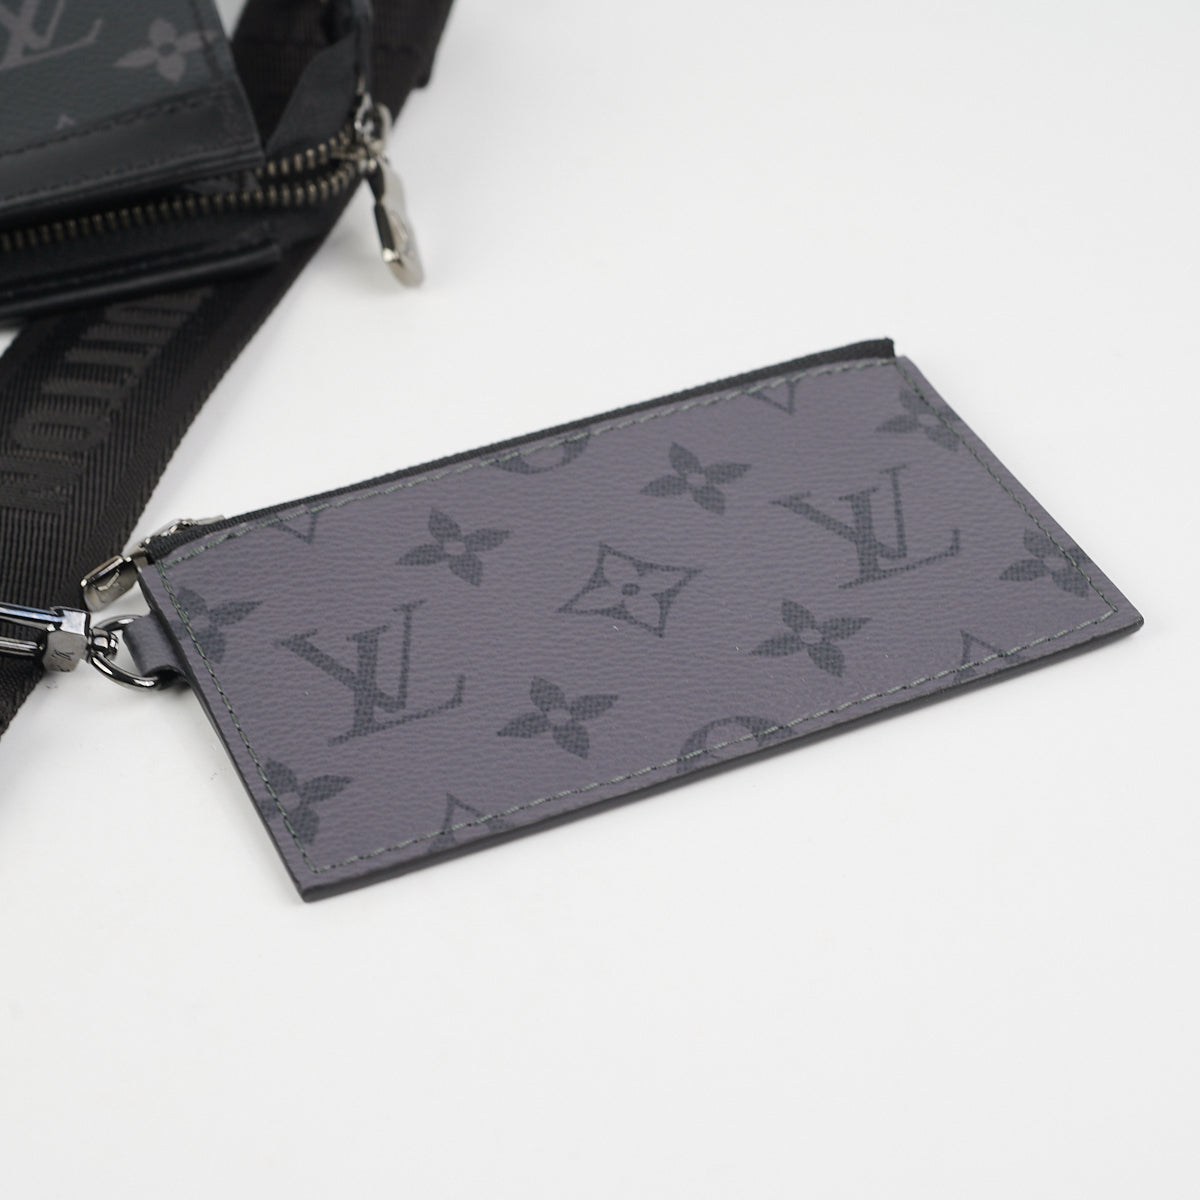 Louis Vuitton Gaston Wearable Wallet - First Look, Initial Review